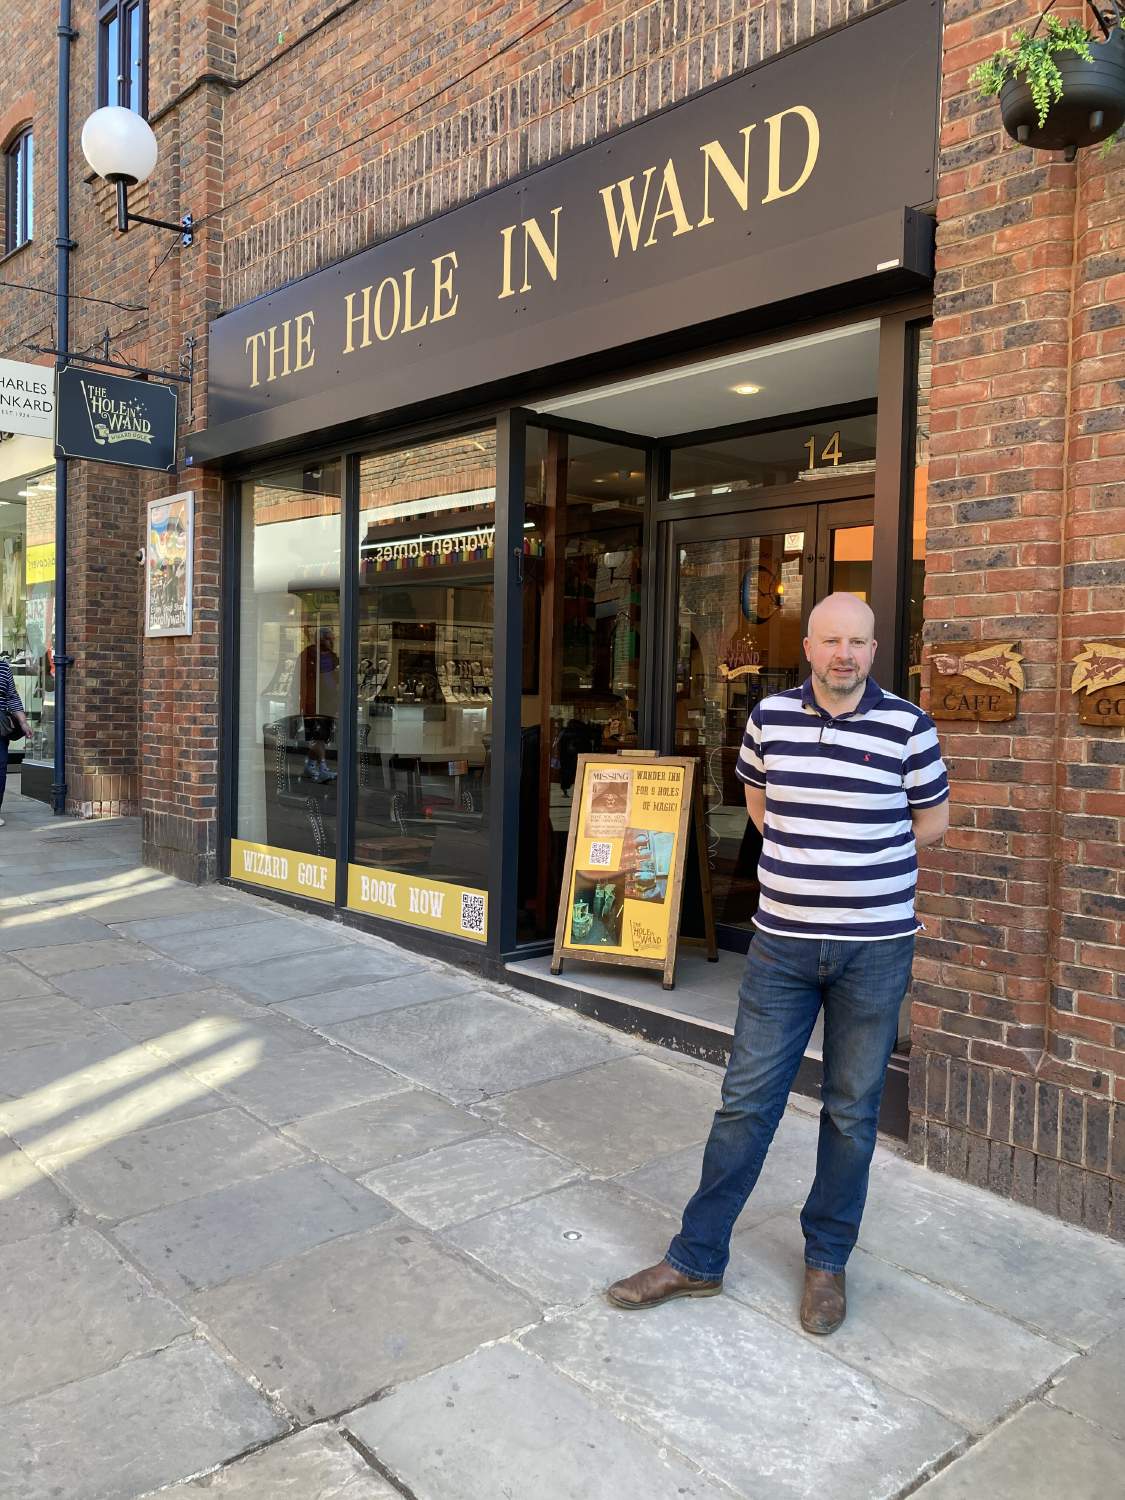 Nouse Interviews Phil Pinder, Co-owner of The Hole in Wand Wizard Golf